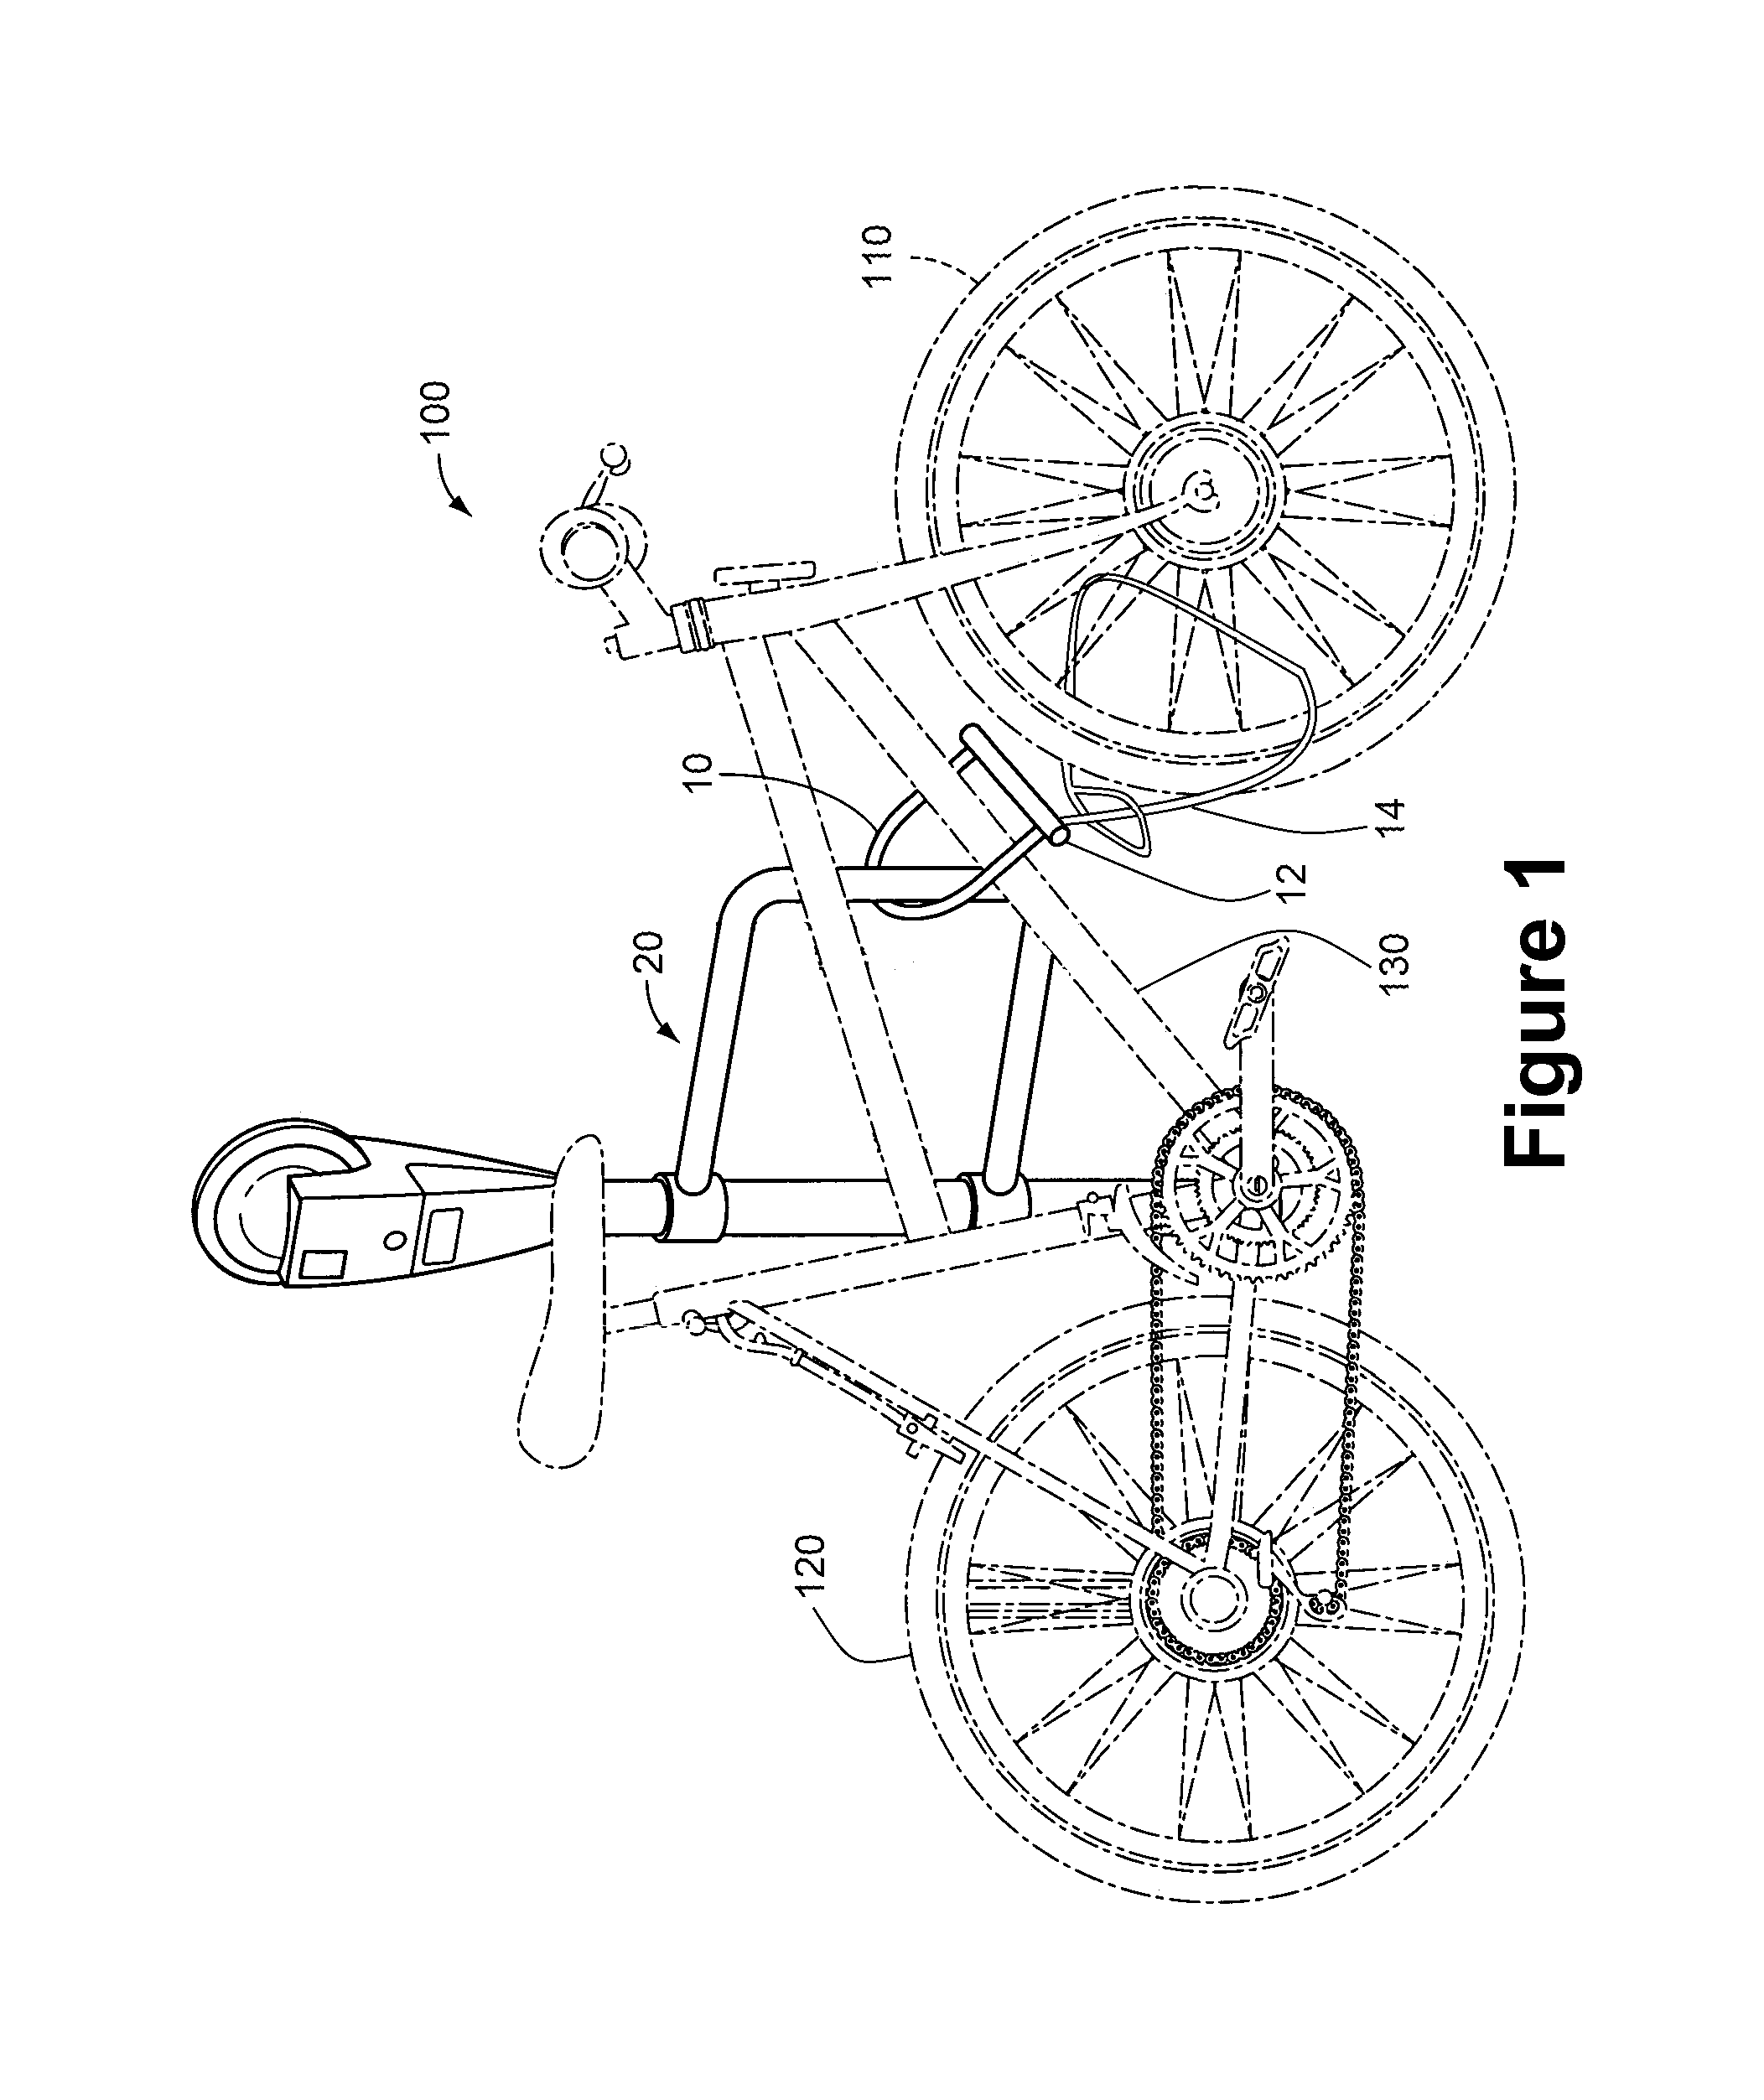 Bicycle and Lock for Deterring and Preventing Theft